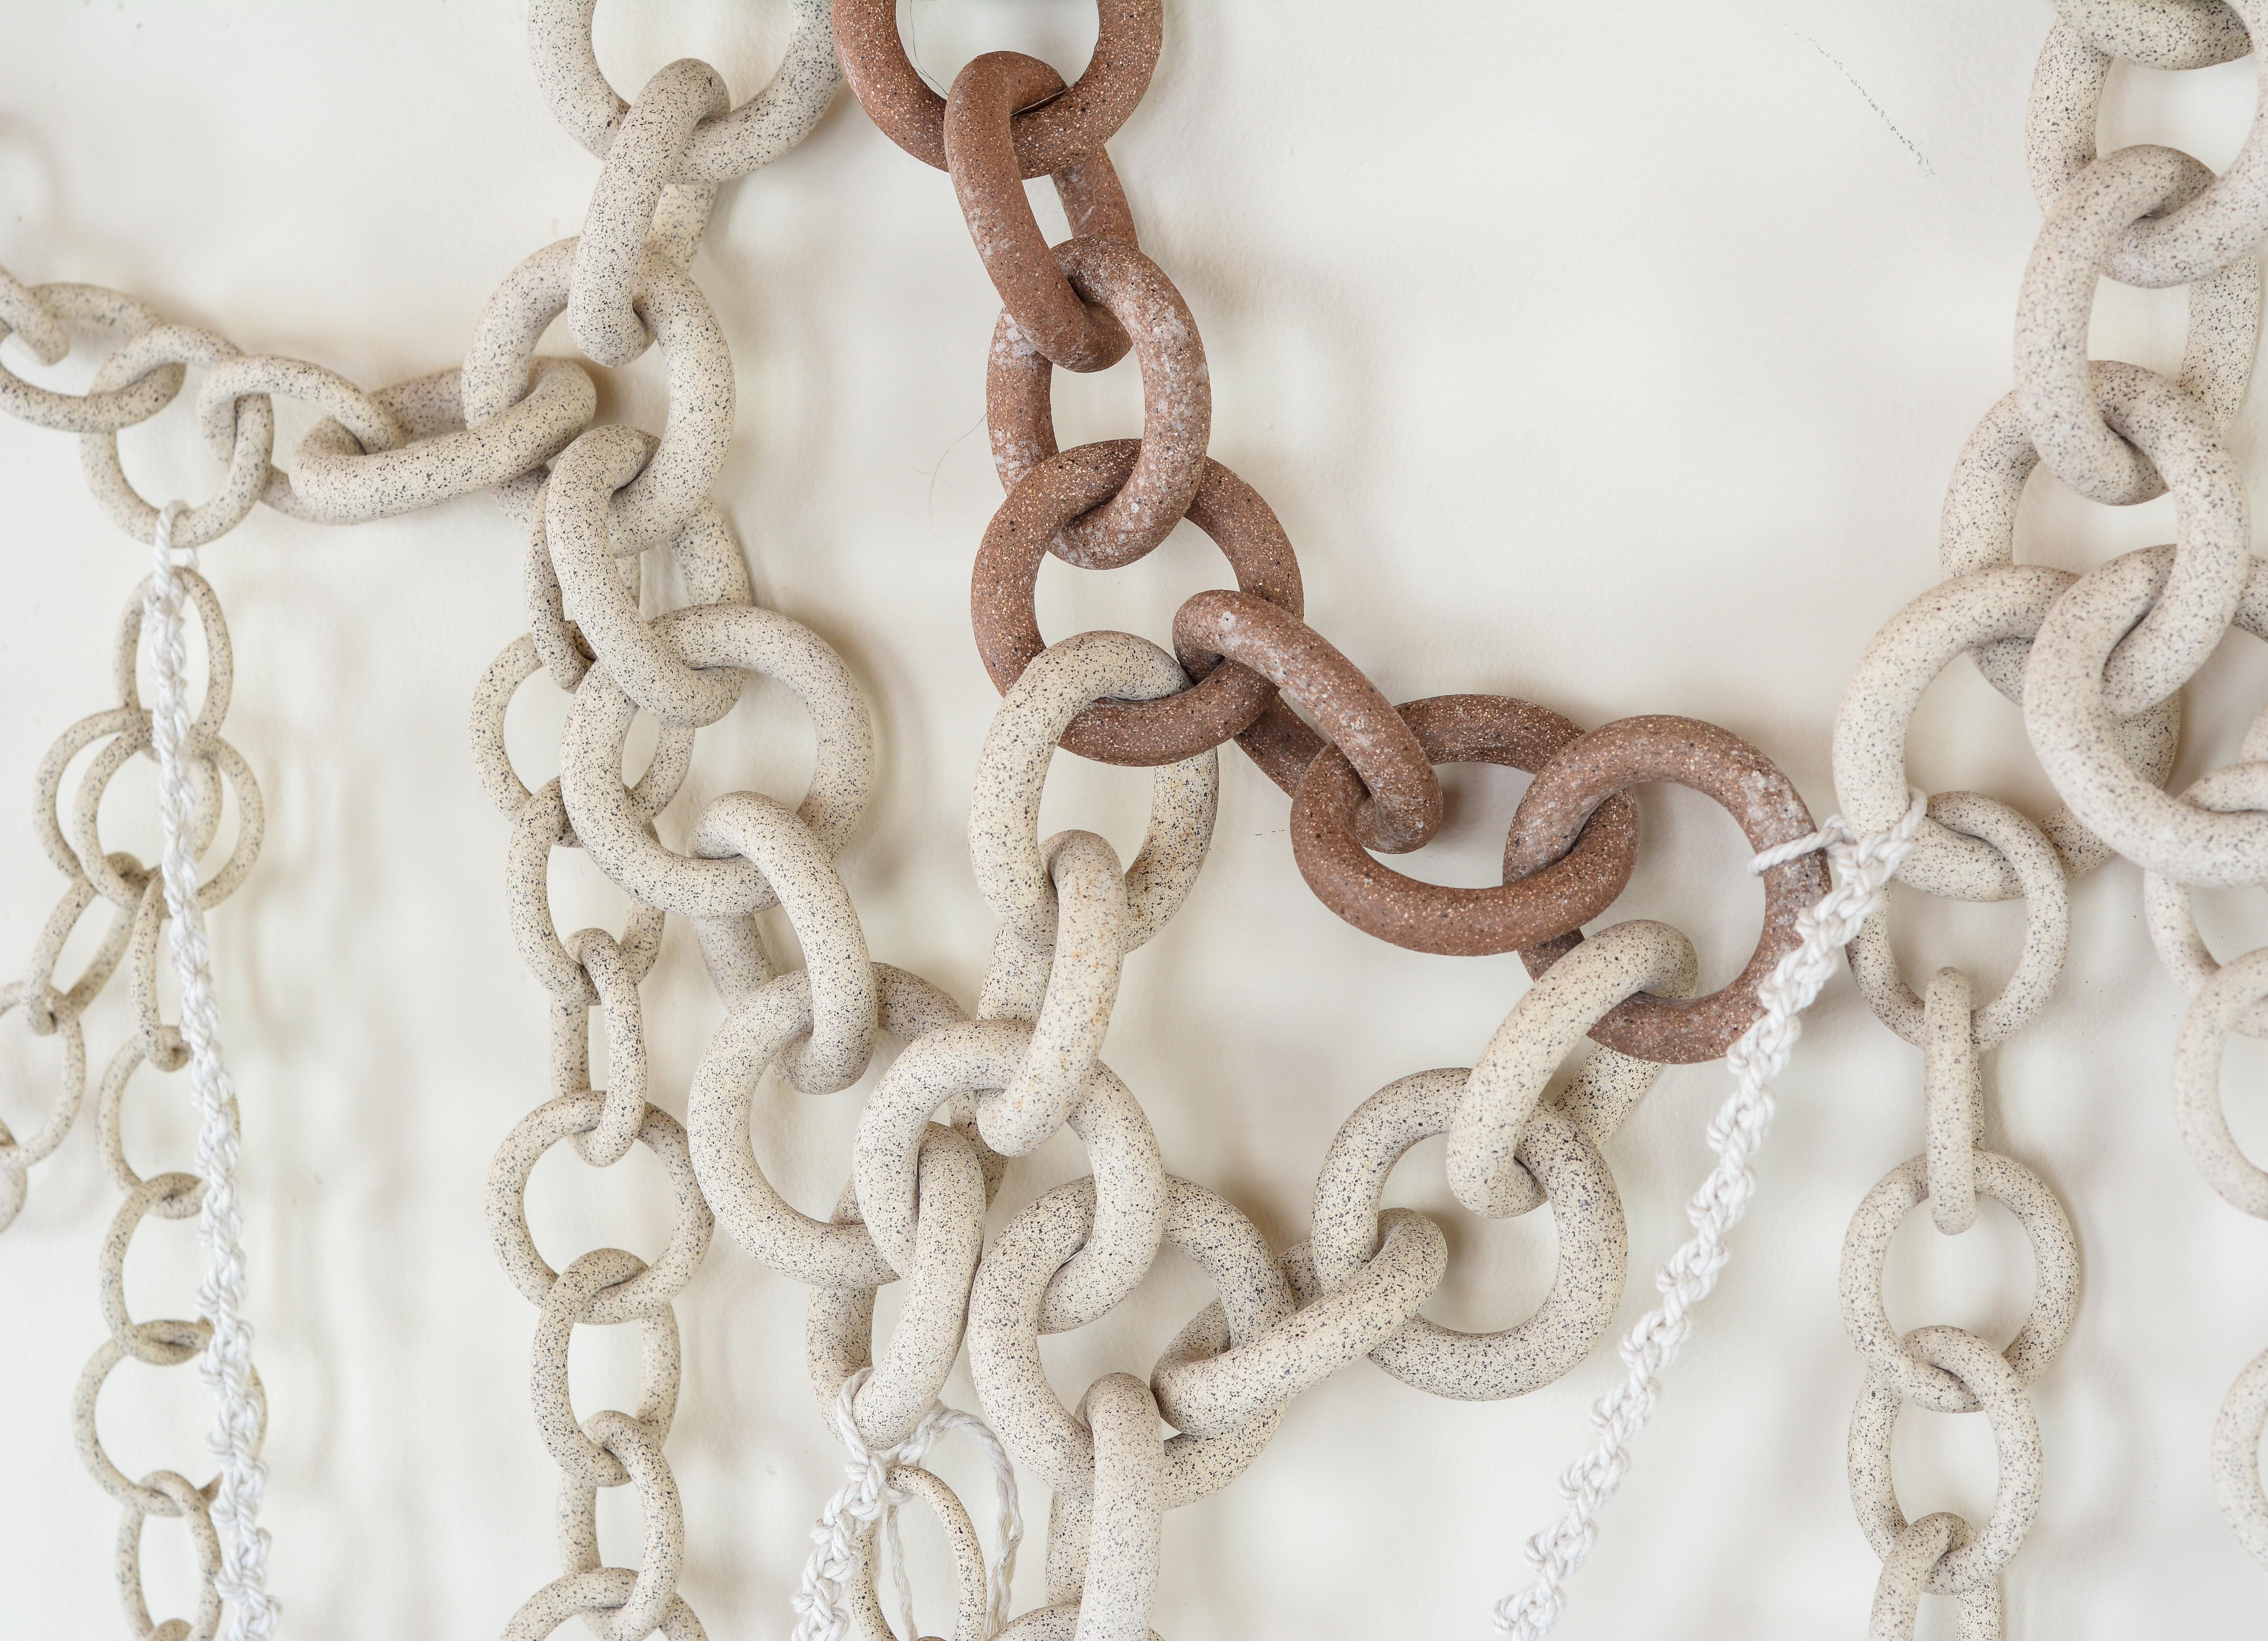 Ceramic Link Chain Wall Sculpture For Sale 1